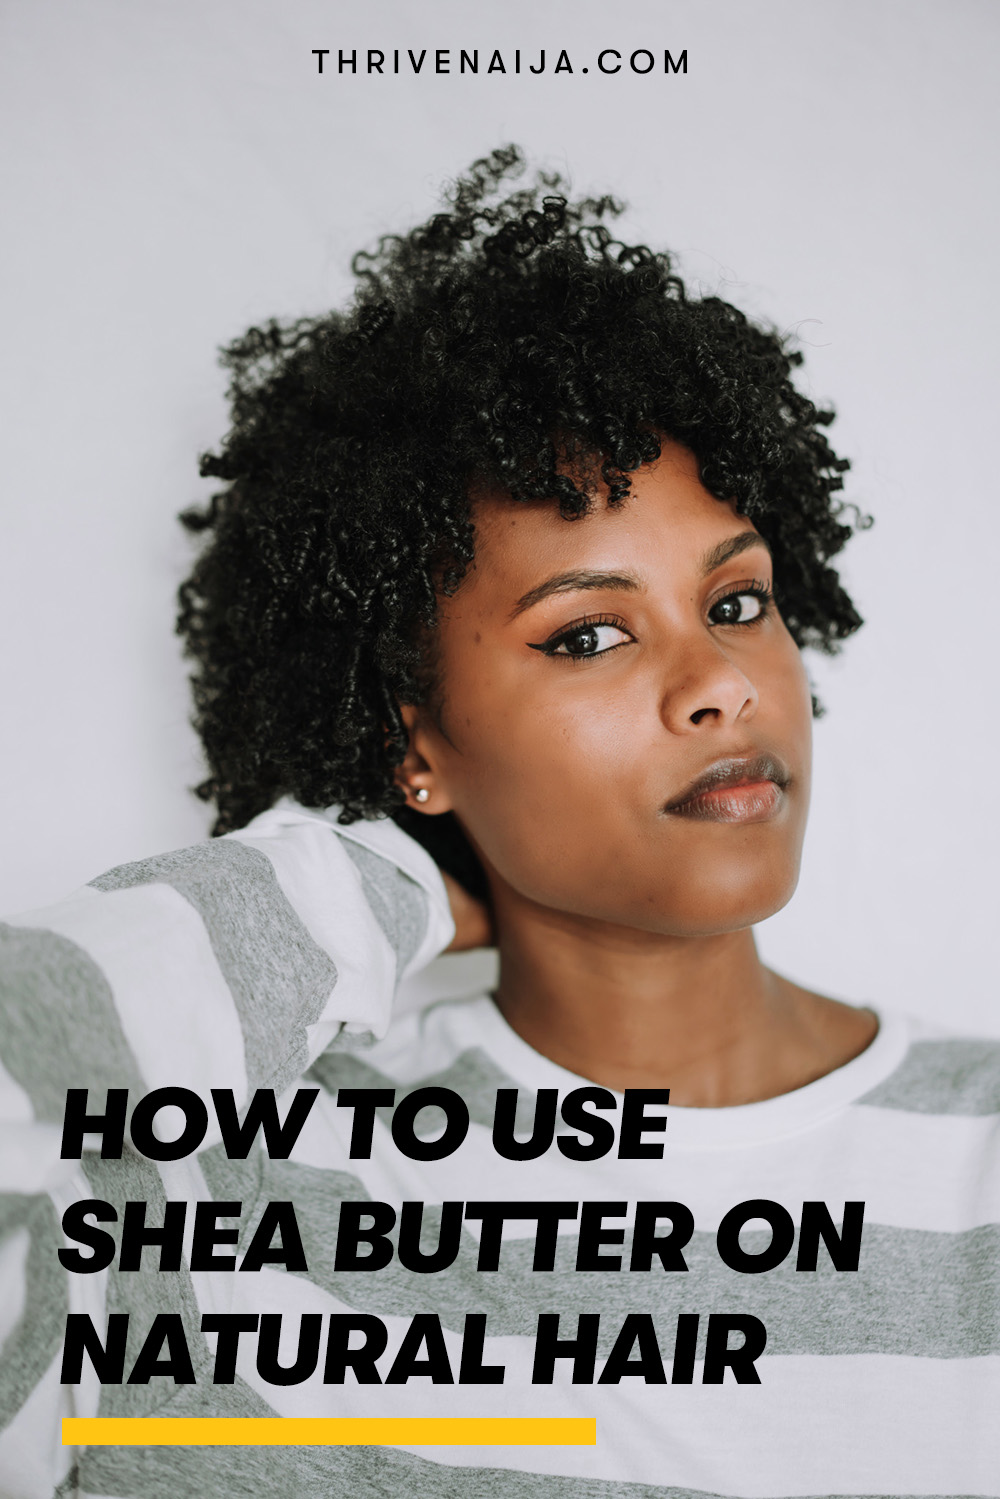 How to Use Shea Butter On Natural Hair